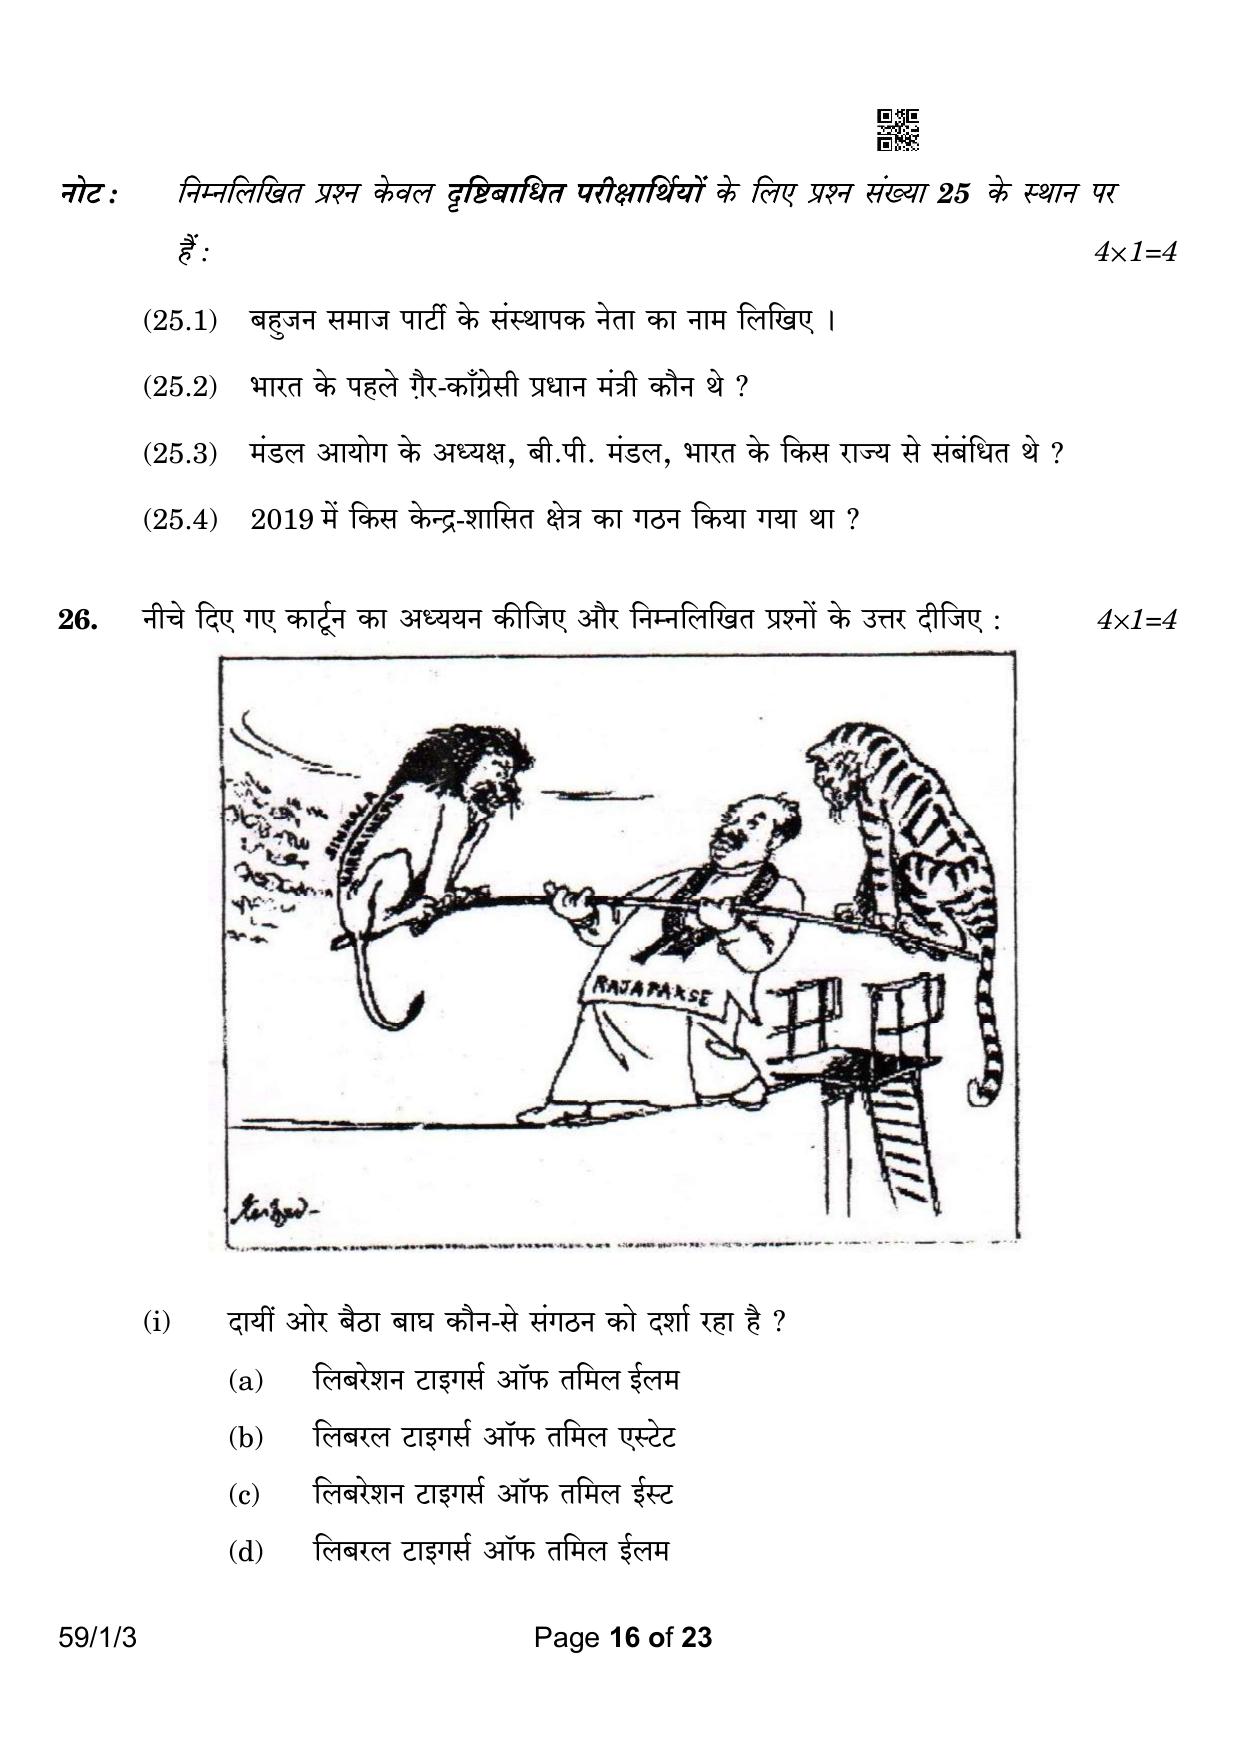 CBSE Class 12 59-1-3 Political Science 2023 Question Paper - Page 16